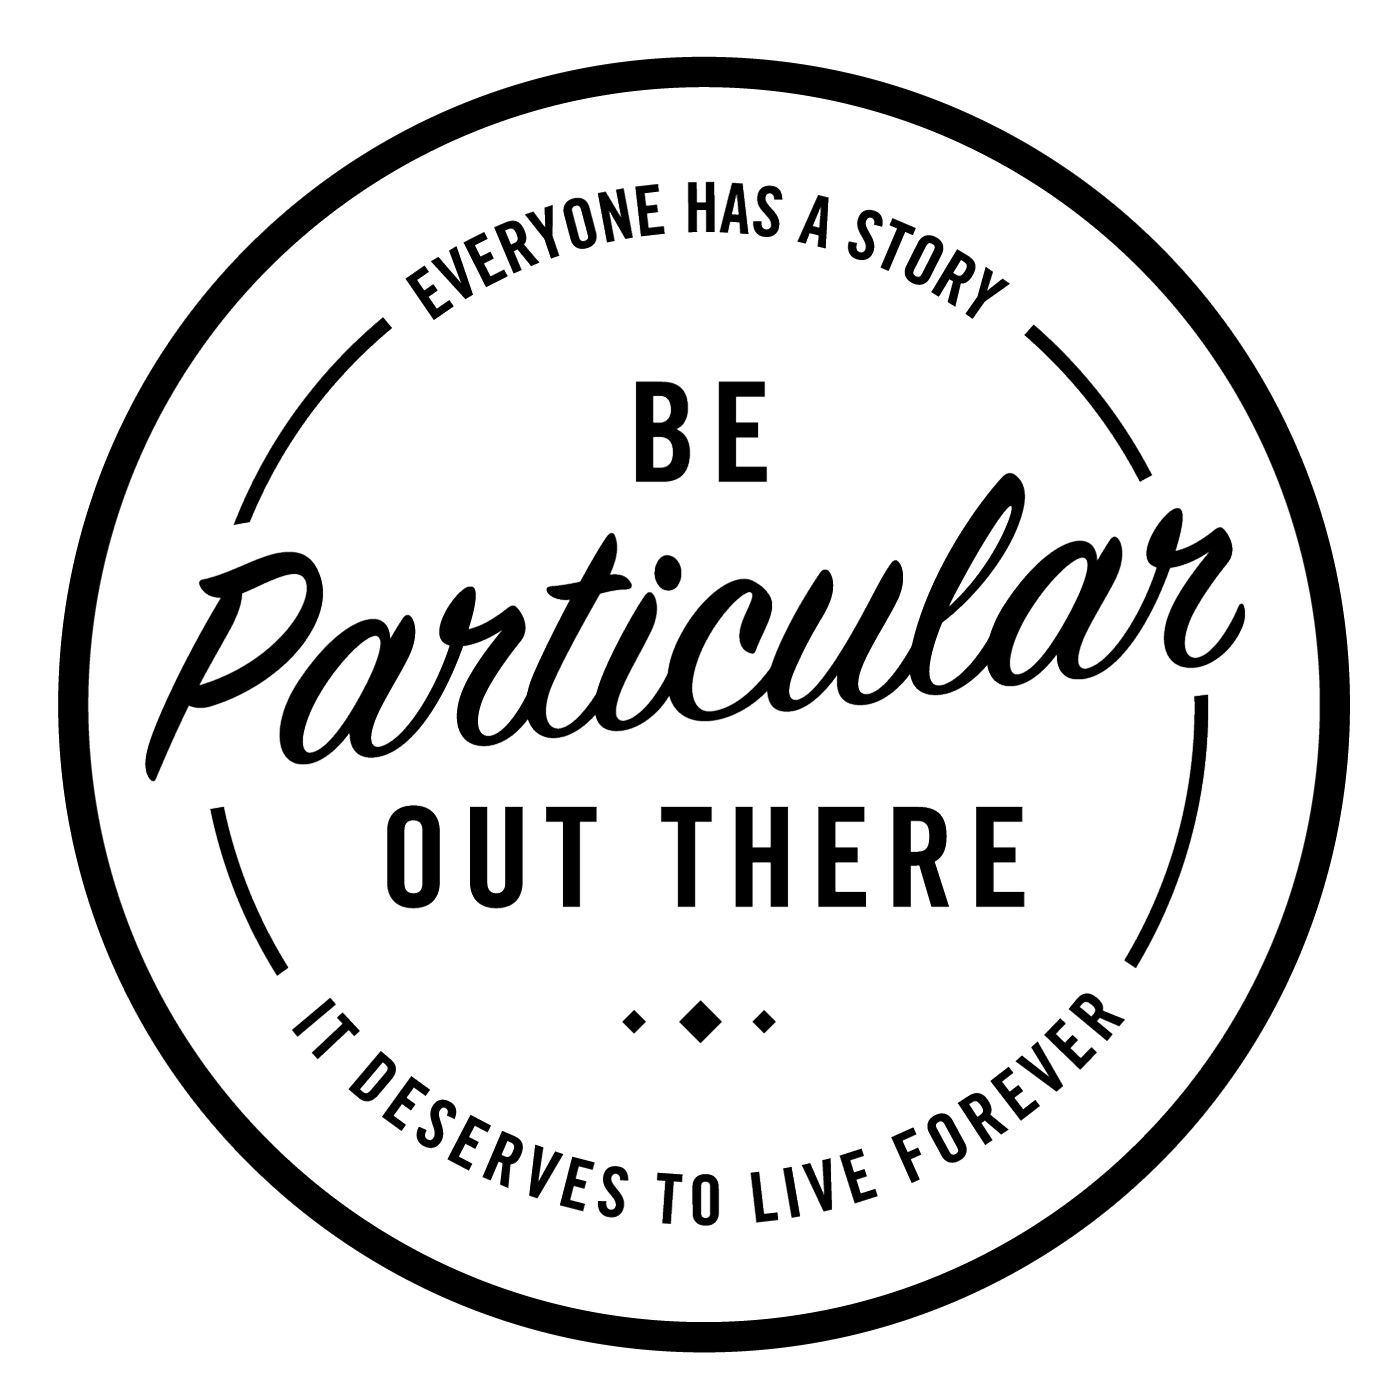 Be Particular Out There | Podcast